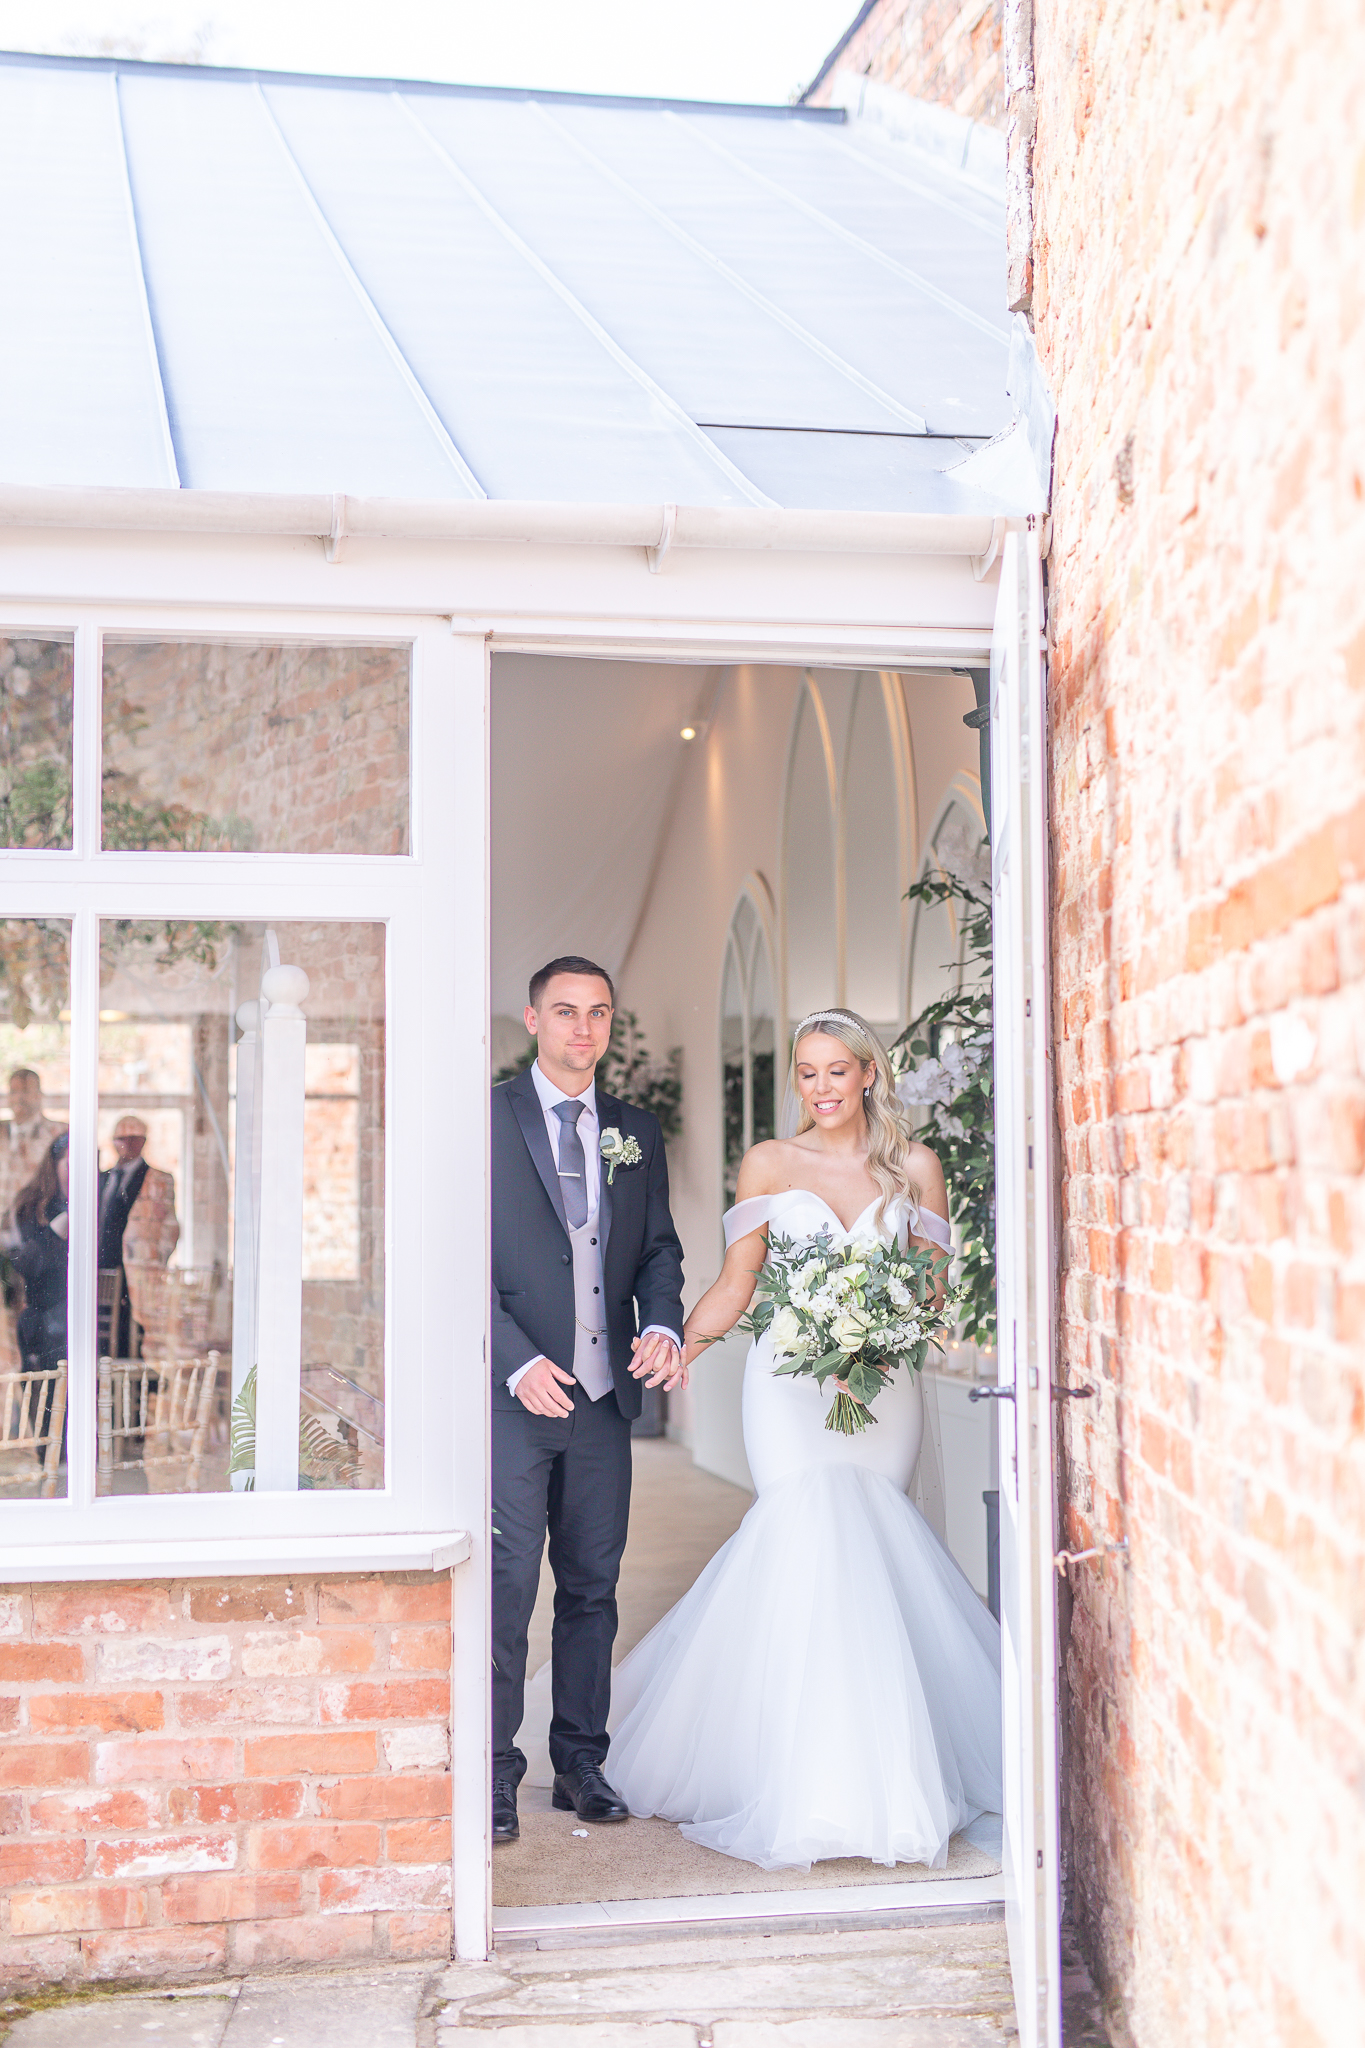 Spencer and Kelsey holding hands walking out of the ceremony room at Combermere Abbey